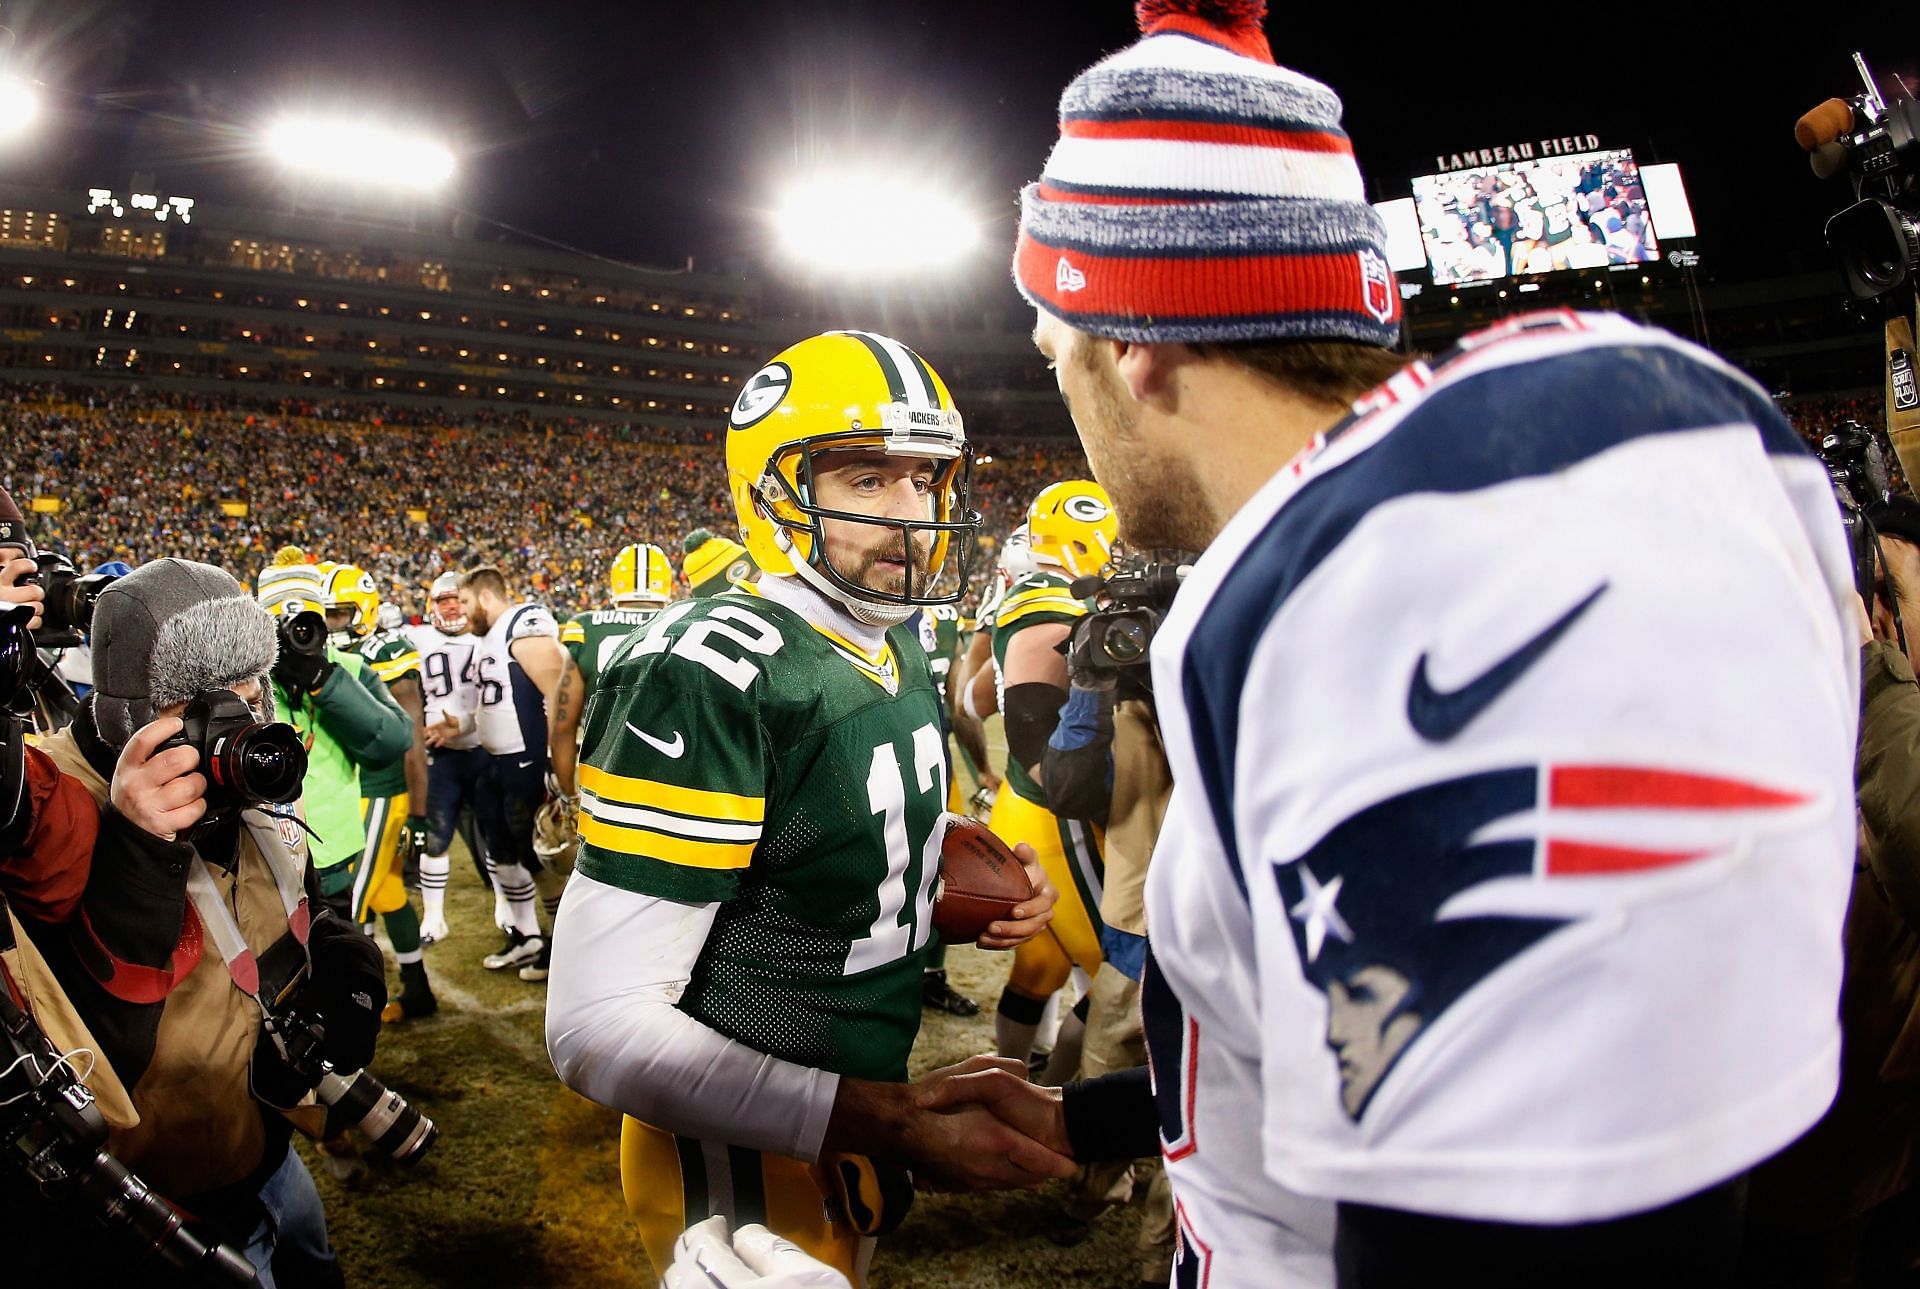 Former Patriots QB TB12 and Packers QB Aaron Rodgers